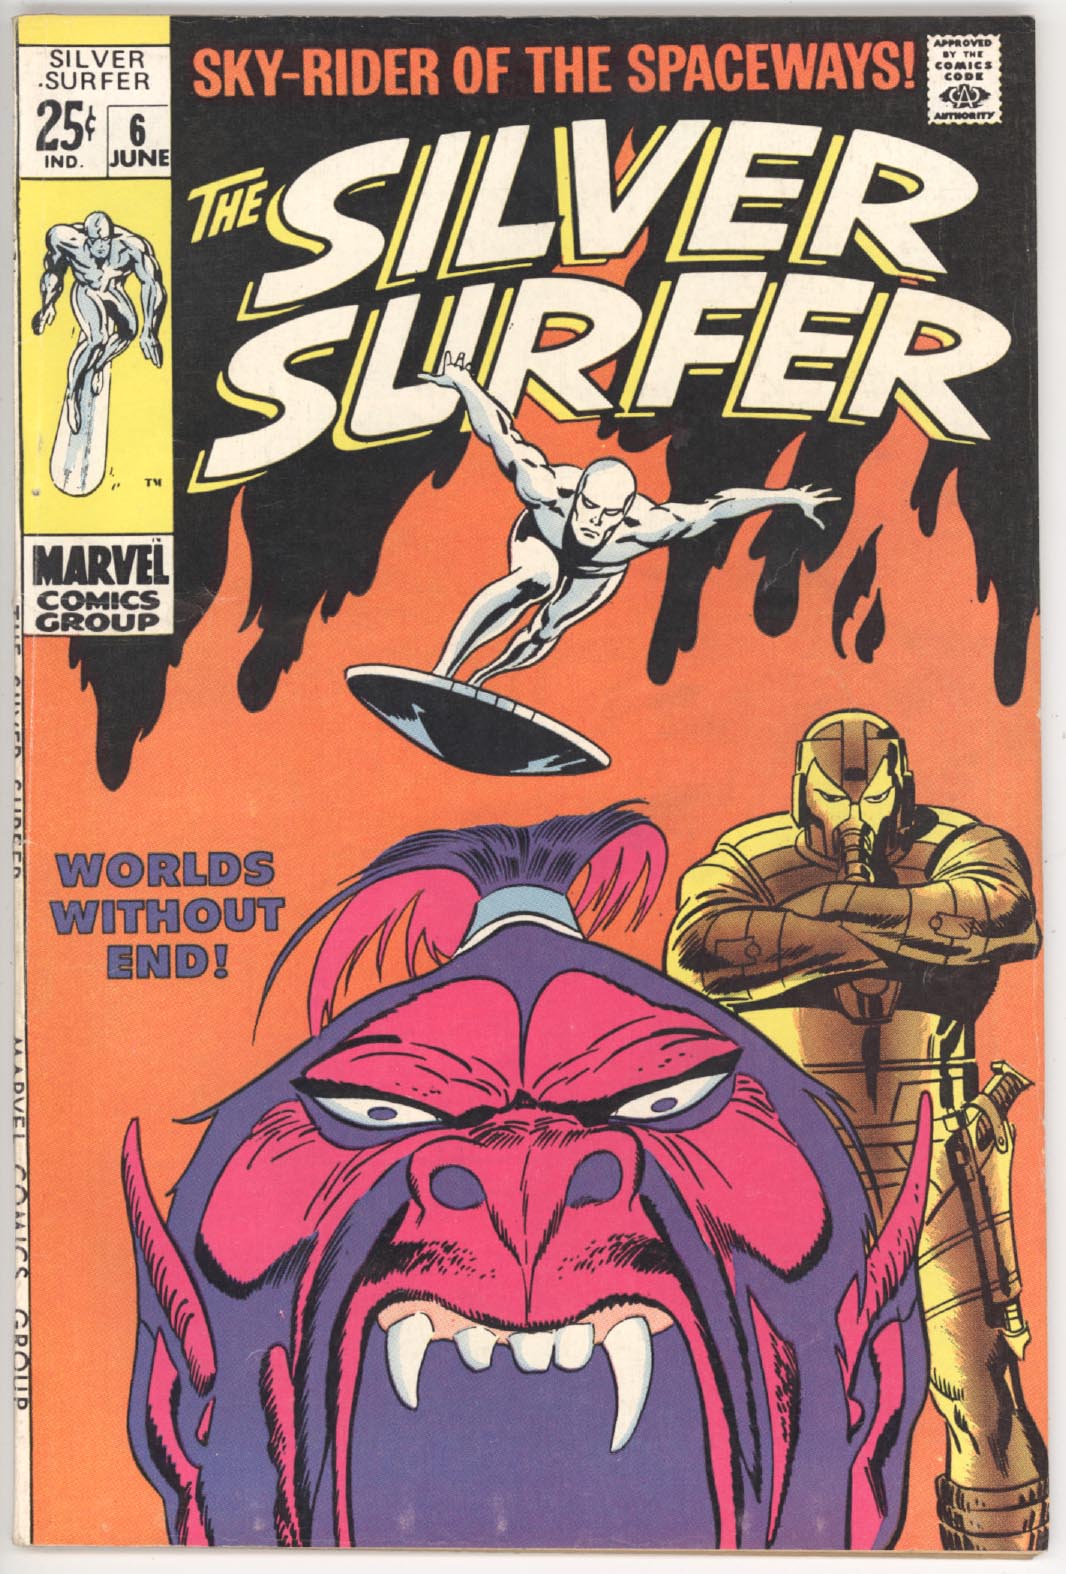 Silver Surfer #6 front